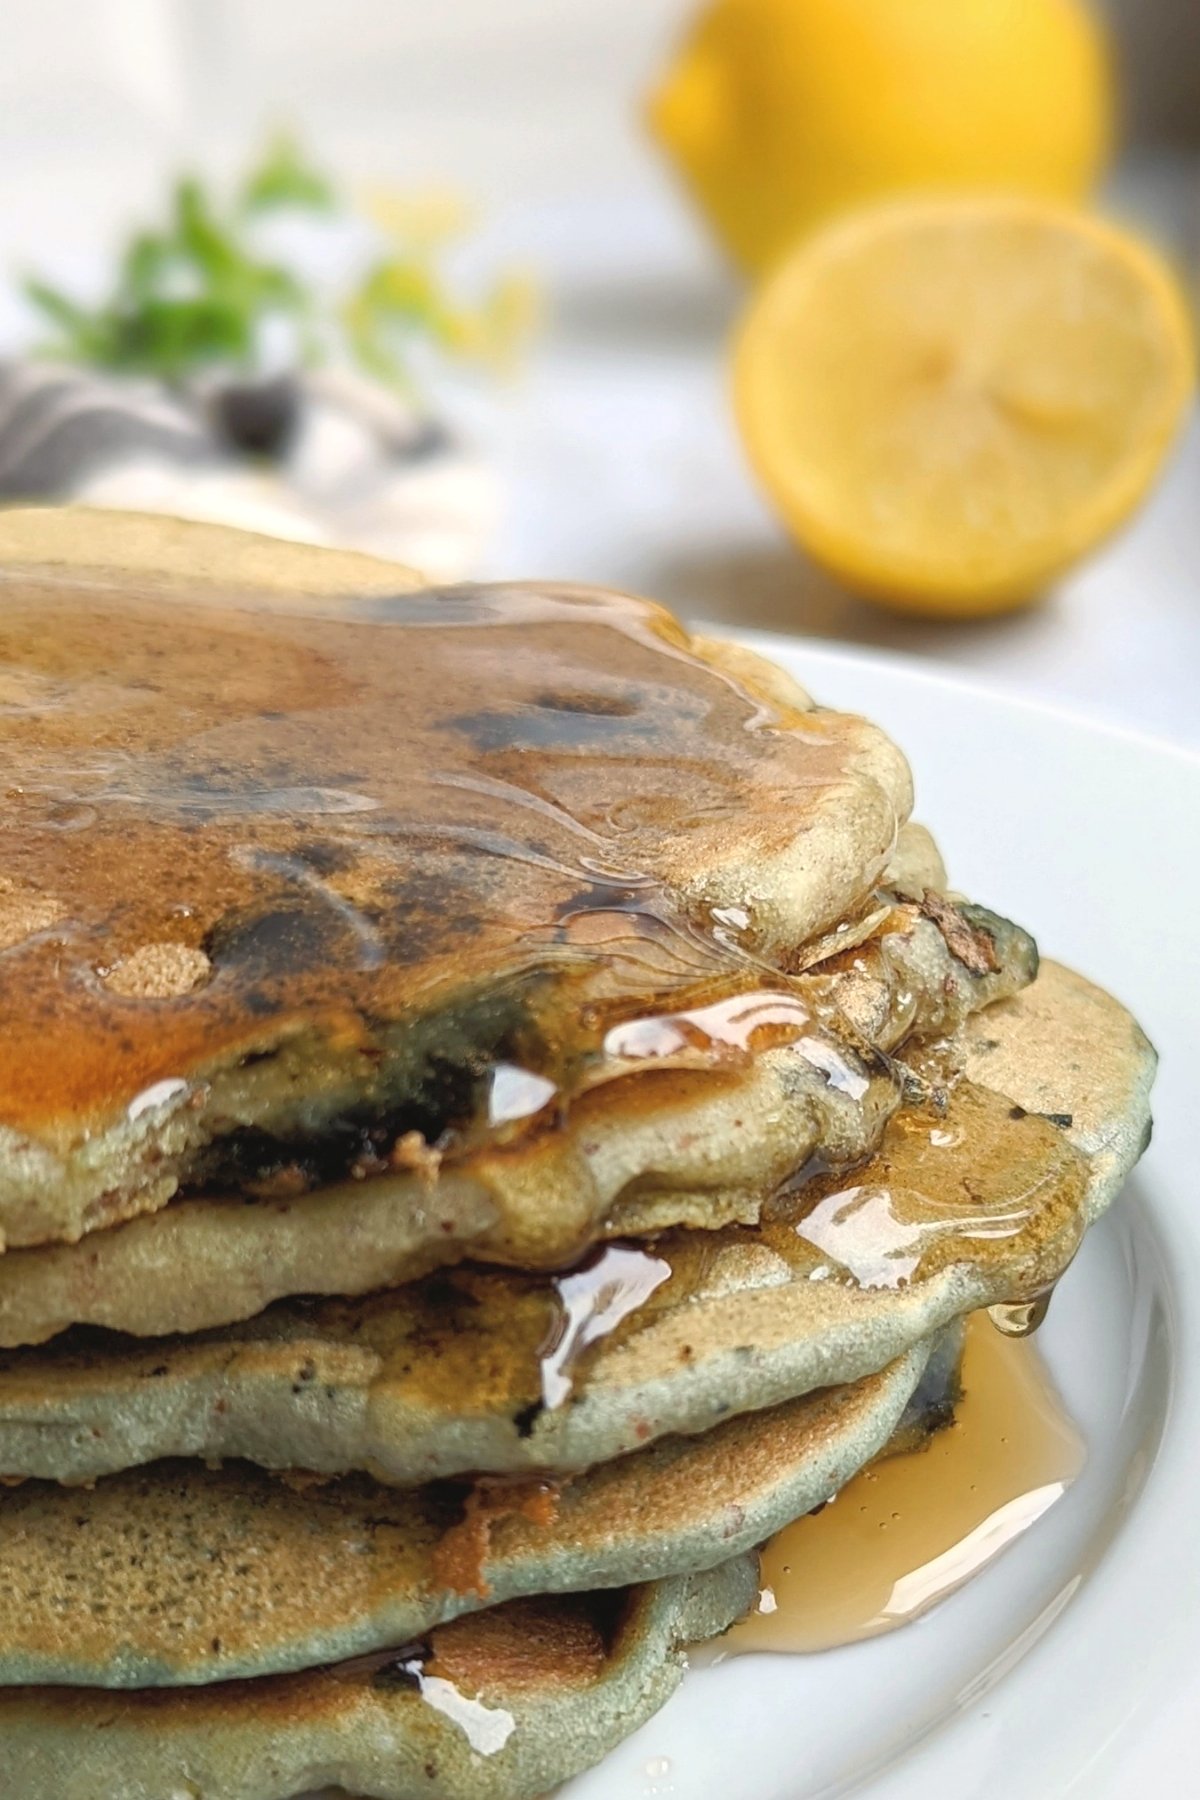 blueberry pancakes with lemon recipe healthy homemade brunch recipes for guests vegan pancakes